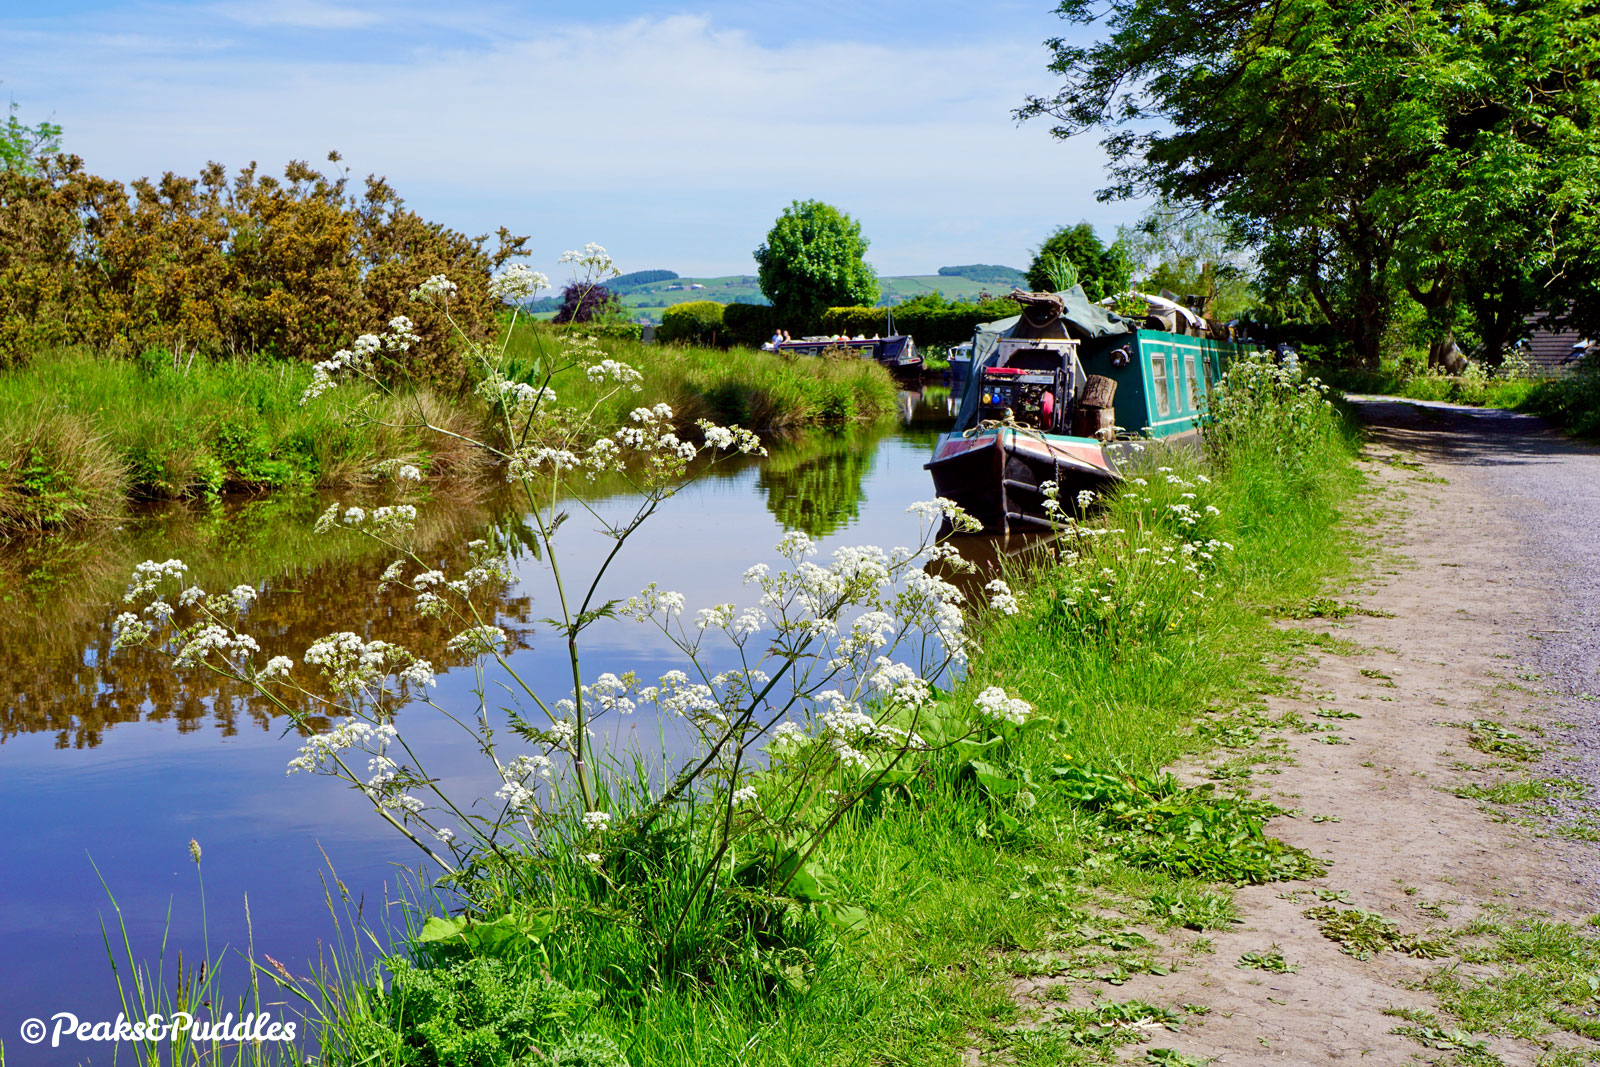 Every turn of the Upper Peak Forest Canal provides a new scenic delight.